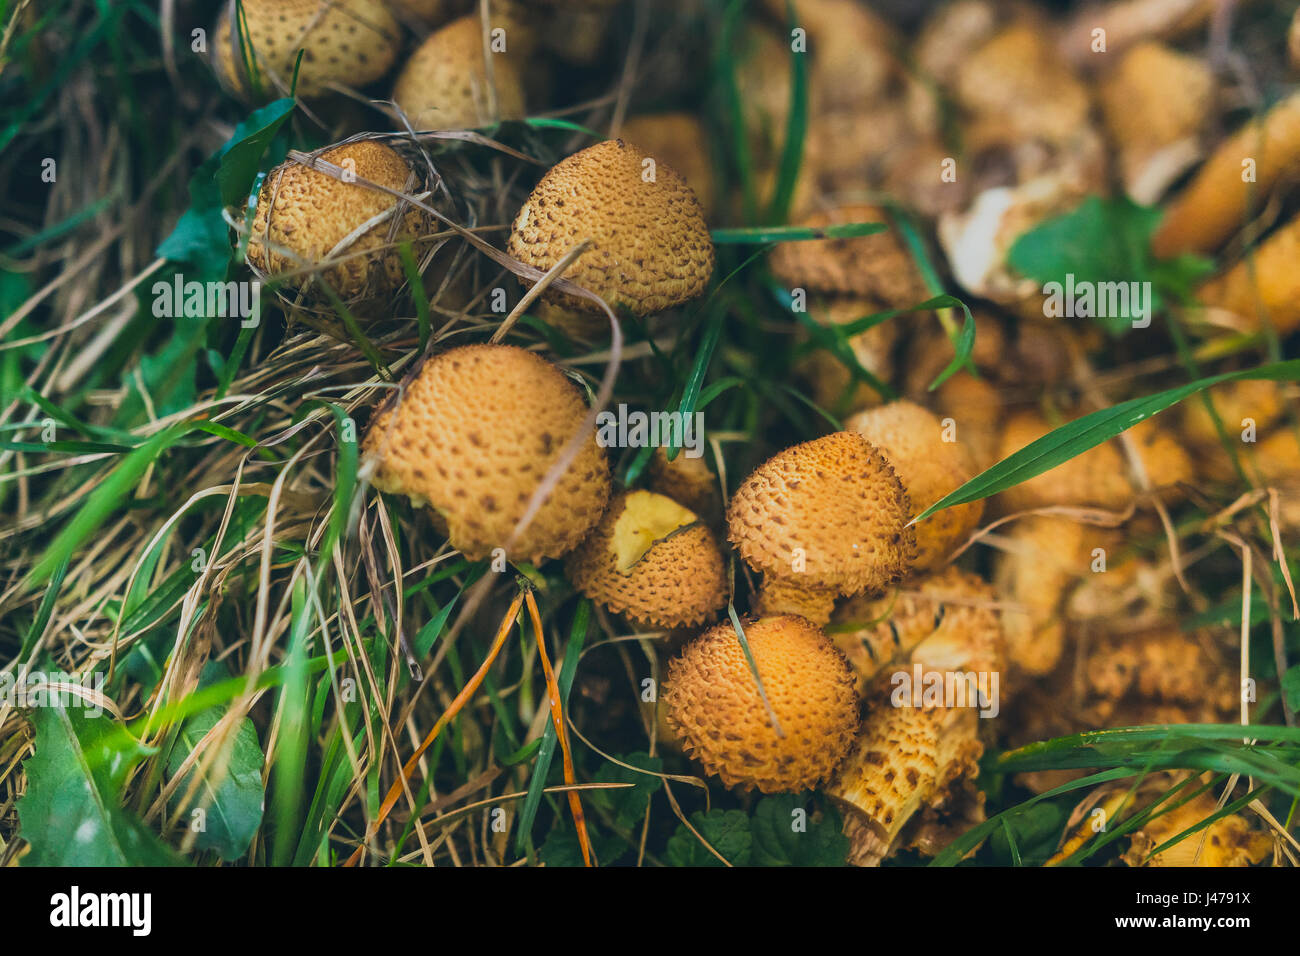 Mushrooms grow in large clusters at the base of trees surrounded by grass at the tollymore forest park in newcastle, county down, northern ireland, uk Stock Photo